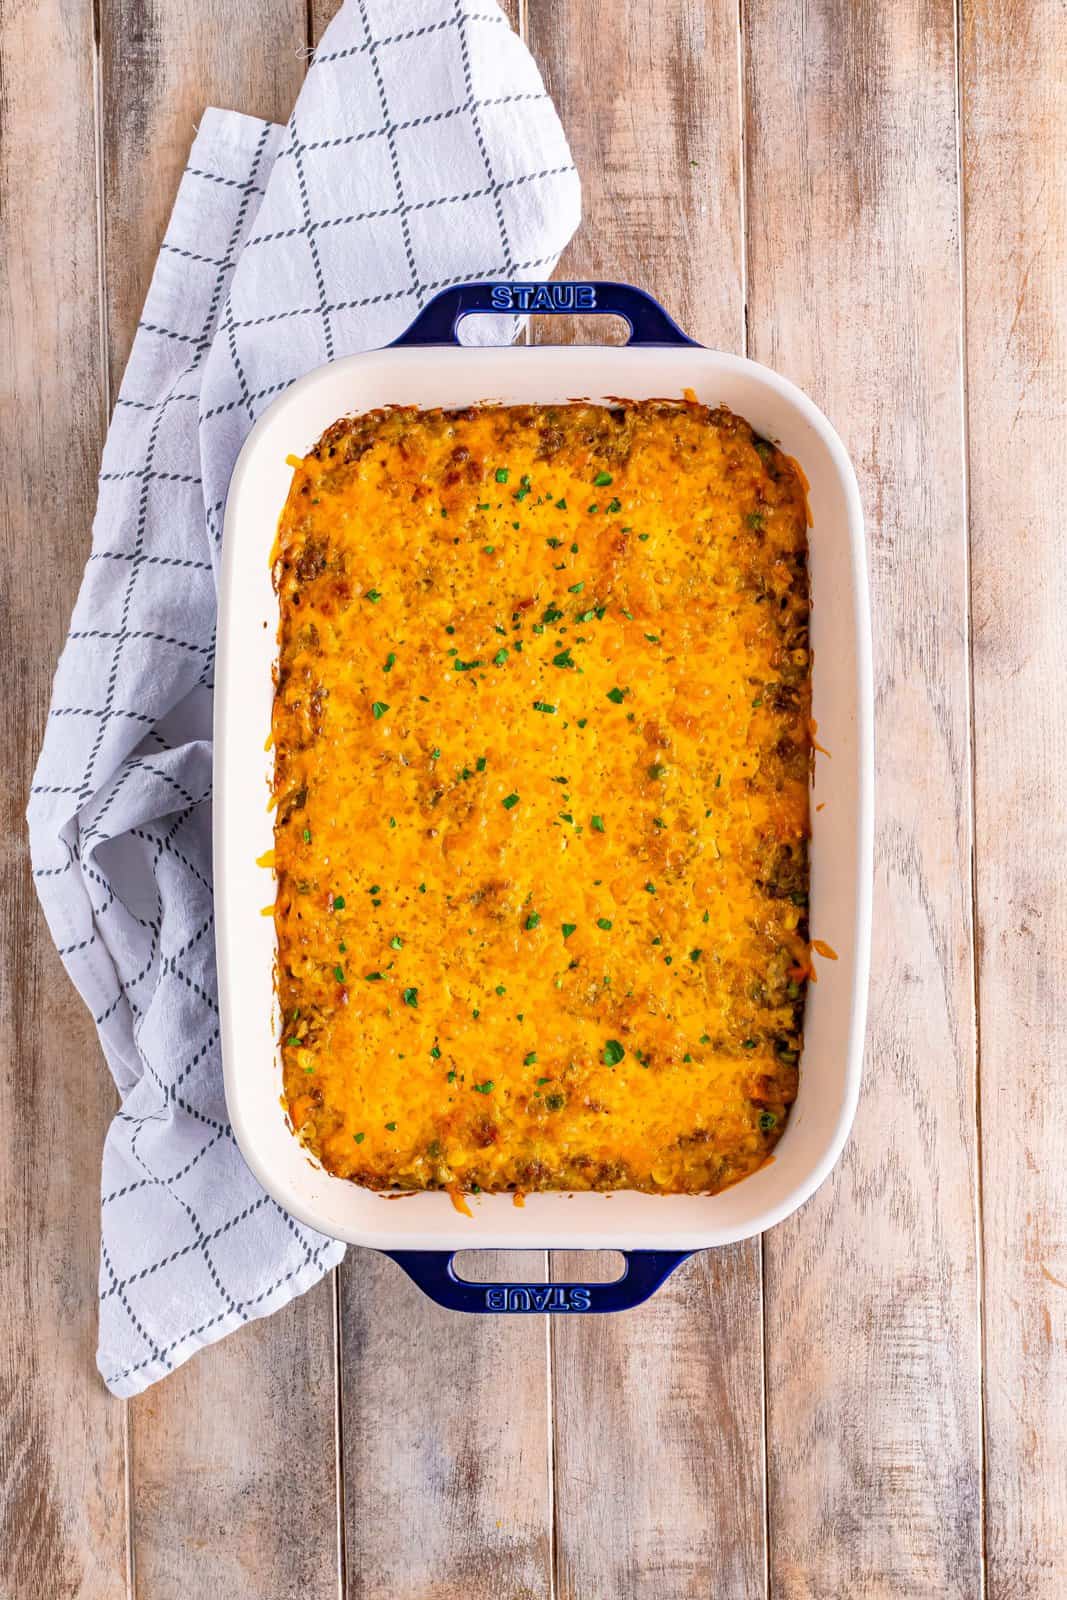 A casserole dish with cheese melted on top of a casserole.